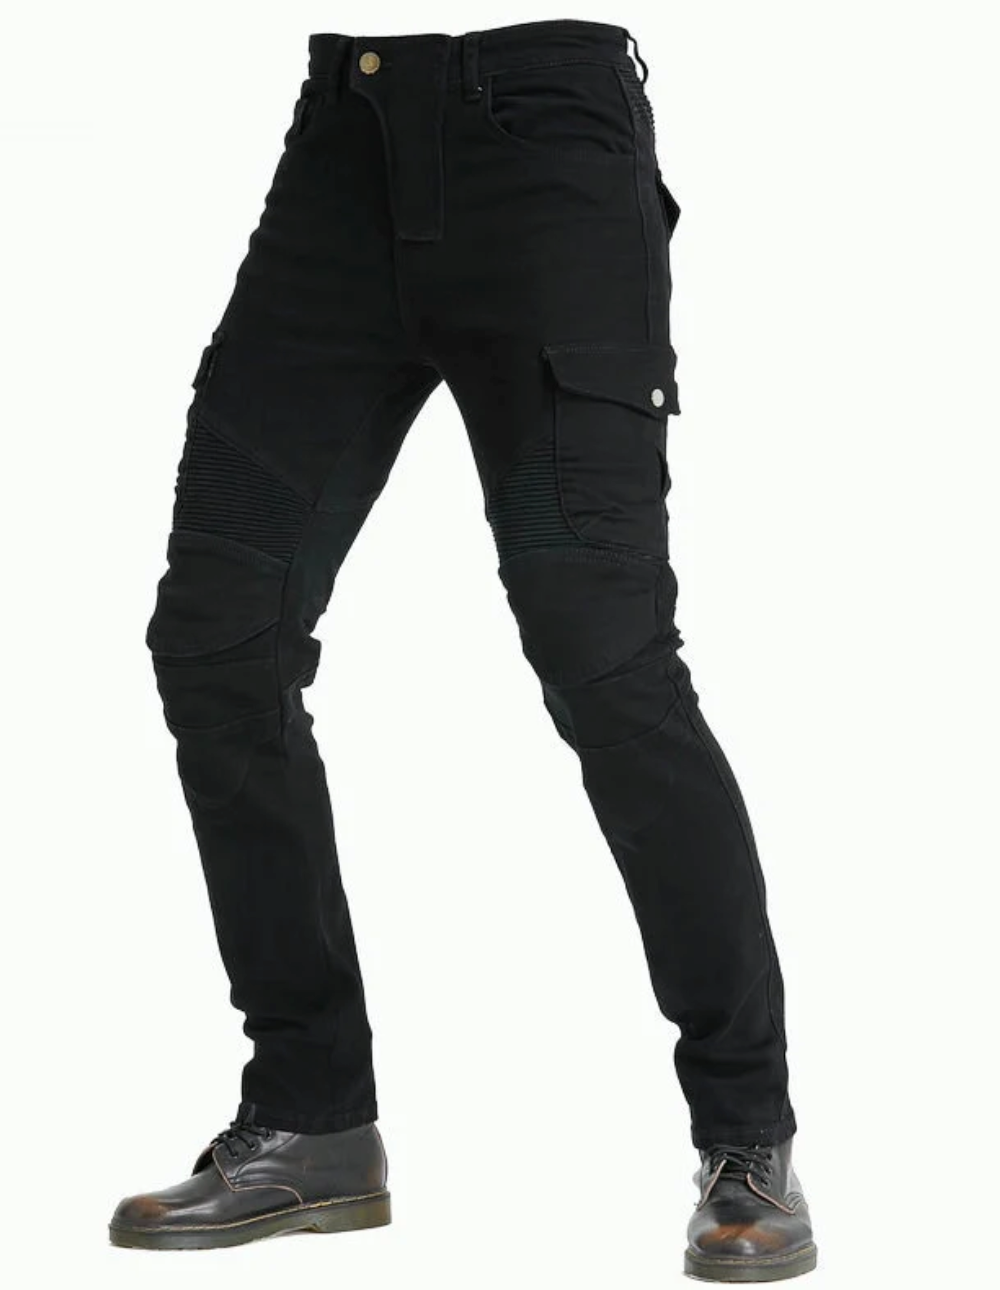 NEW 2023 Kevlar/Aramid Lined Armored Riding Jeans Black